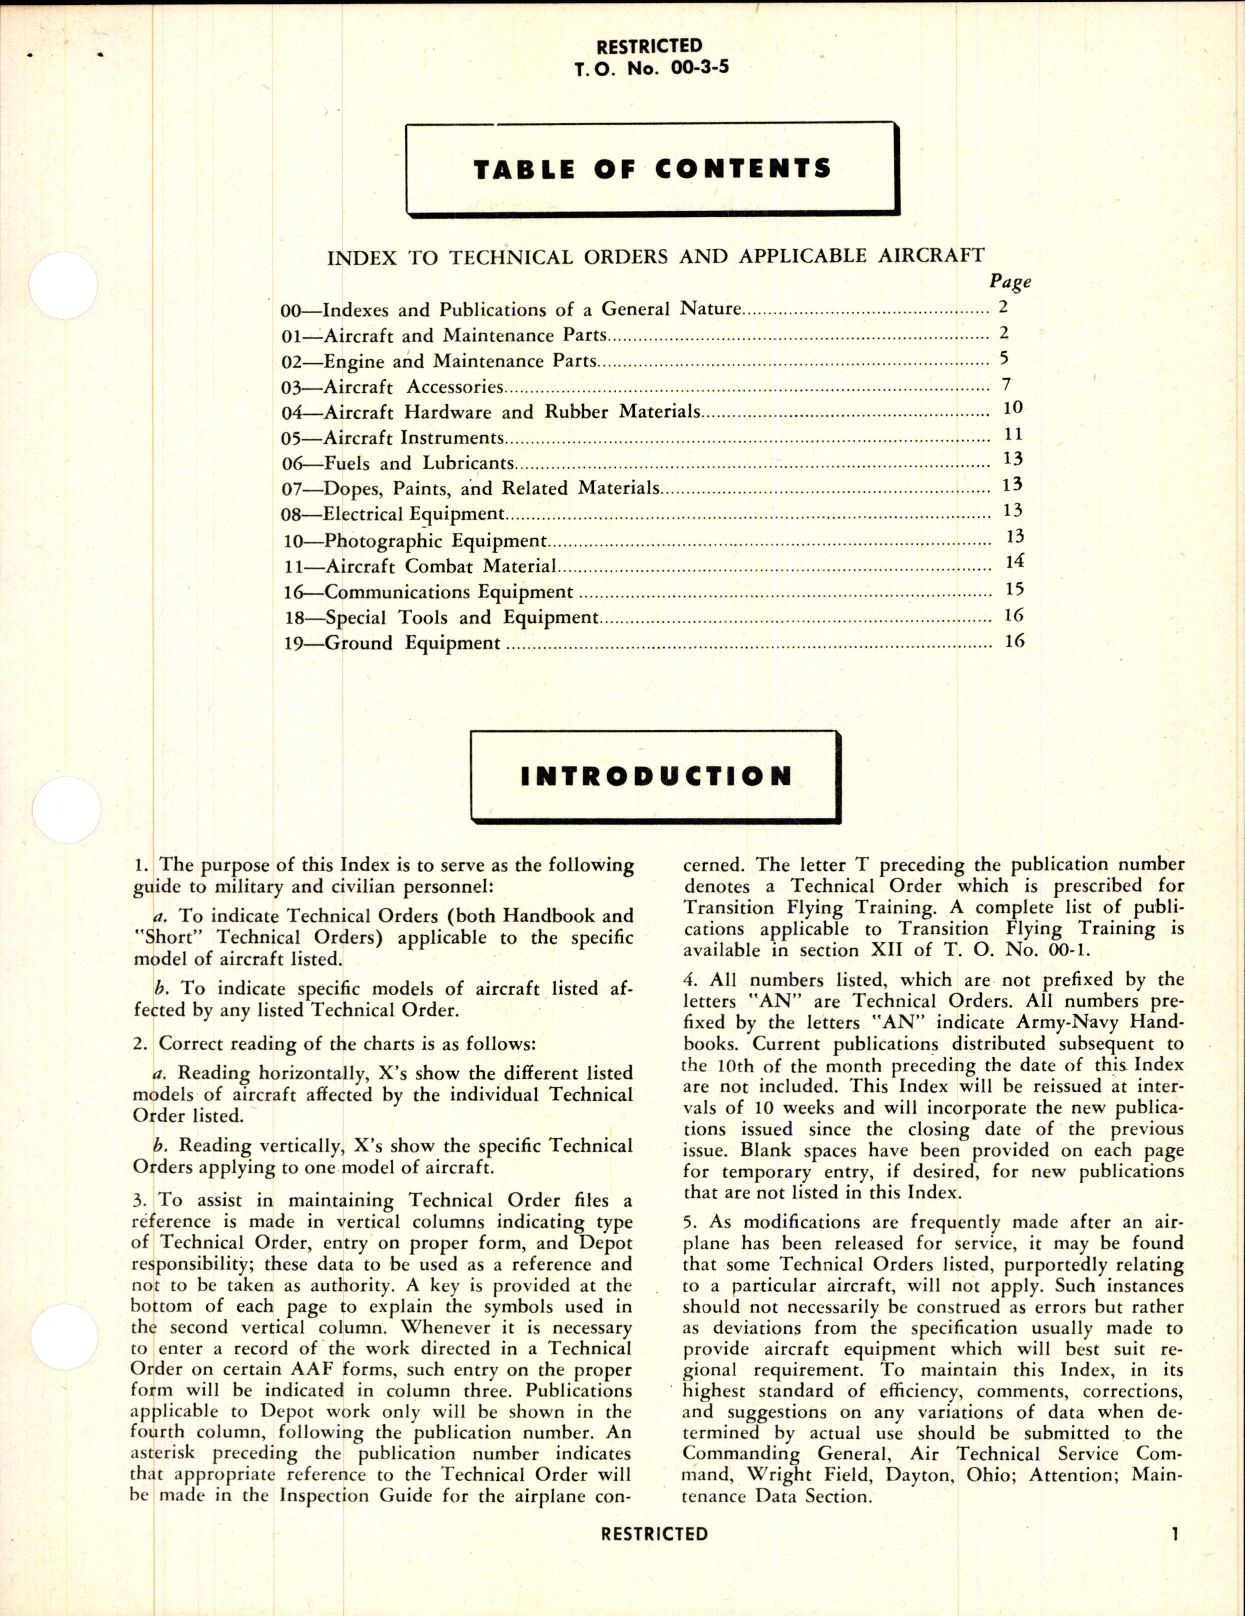 Sample page 3 from AirCorps Library document: Index for Miscellaneous Aircraft